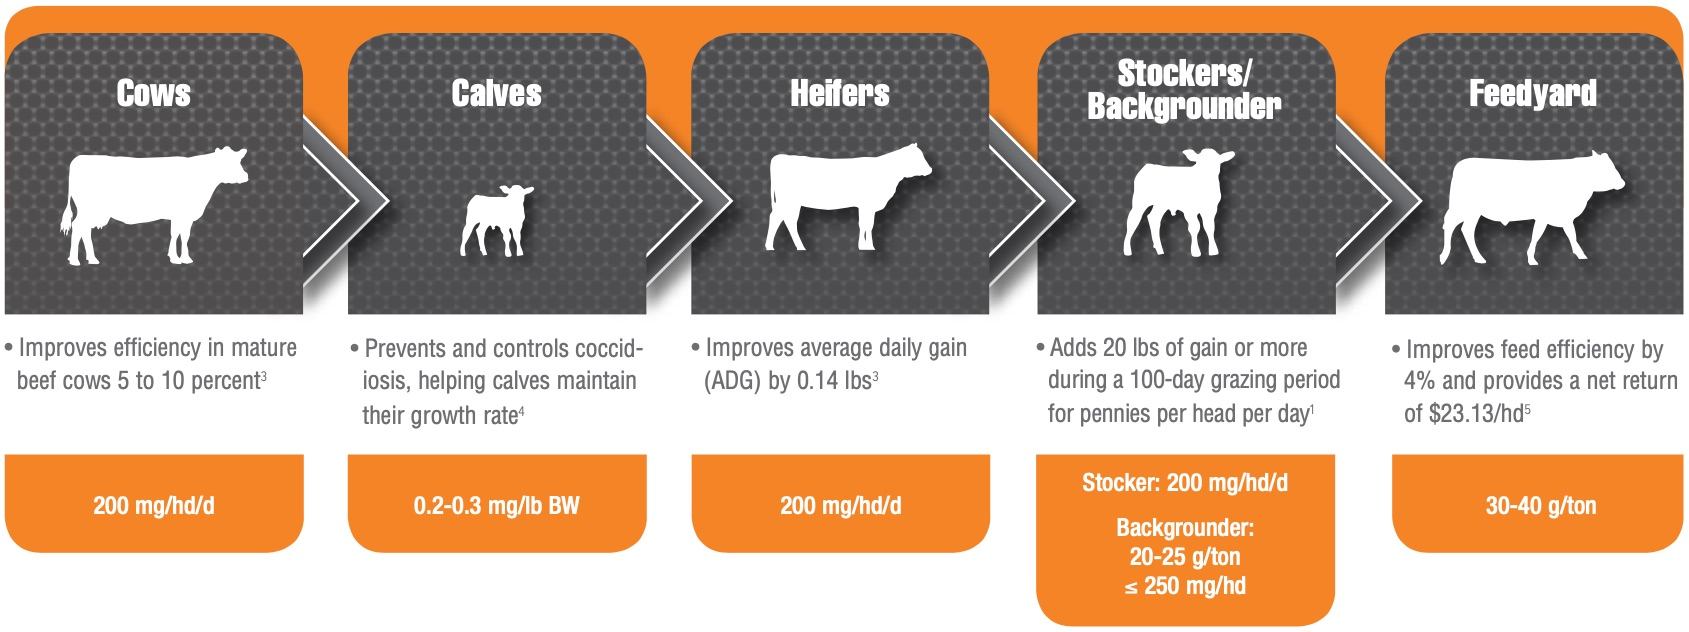 chart showing benefits of Rumensin over various life stages of cattle